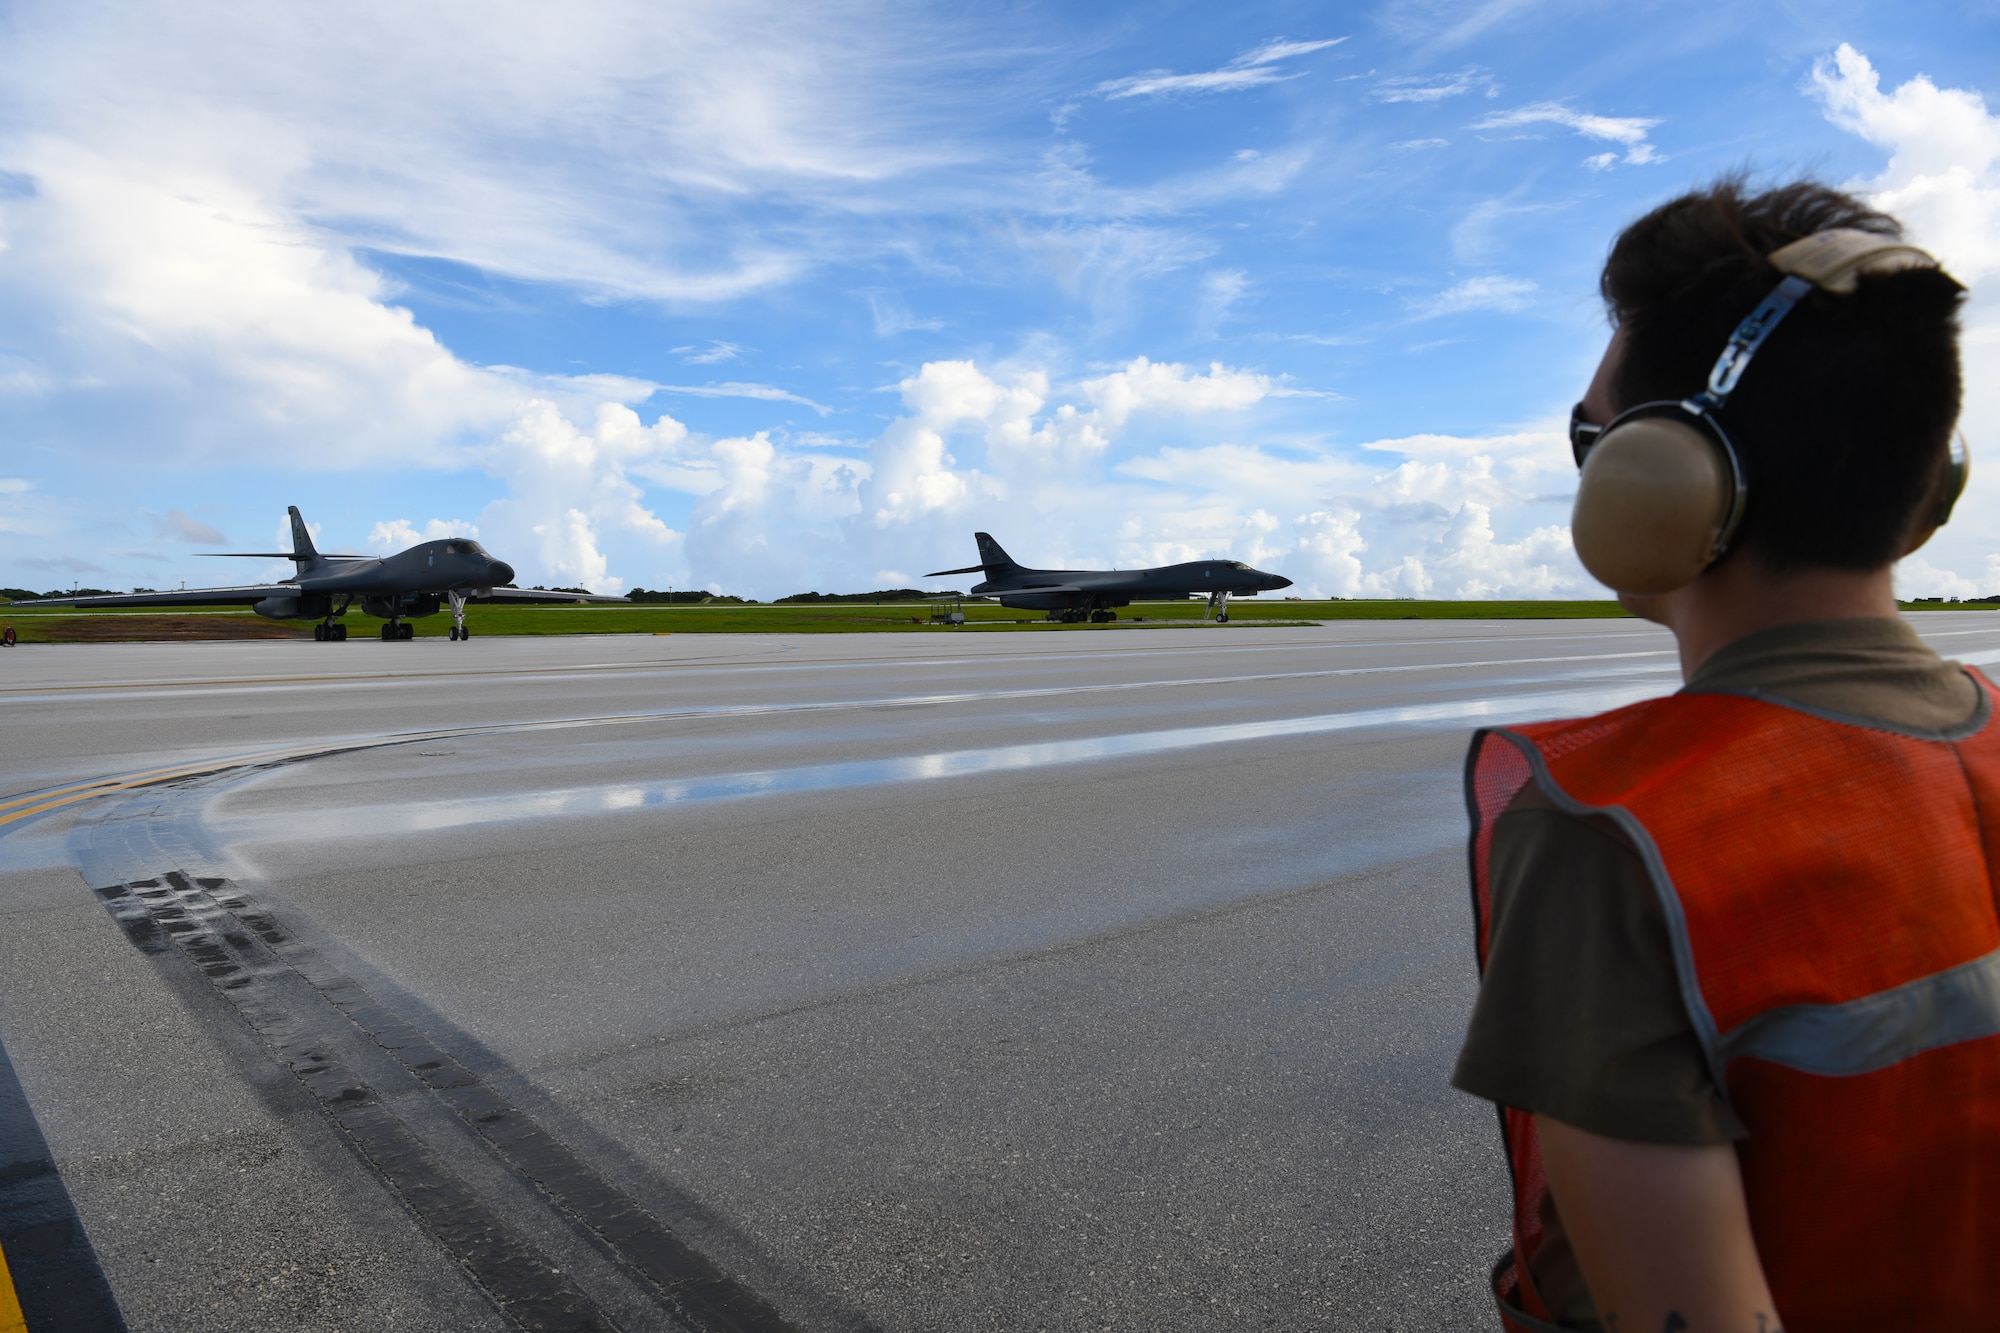 A maintainer assigned to the 34th Expeditionary Bomb Squadron, Ellsworth Air Force Base, S.D., prepares to marshal a B-1B Lancer for take-off during Exercise Valiant Shield at Andersen AFB, Guam, Sept. 18, 2020. Valiant Shield is a series of military exercises that promote integration and interoperability among joint forces. Each successive exercise builds on lessons learned from the previous training to validate and enhance complementary capabilities and develop new tactics, techniques and procedures. (U.S. Air Force photo by Staff Sgt. Nicolas Z. Erwin)